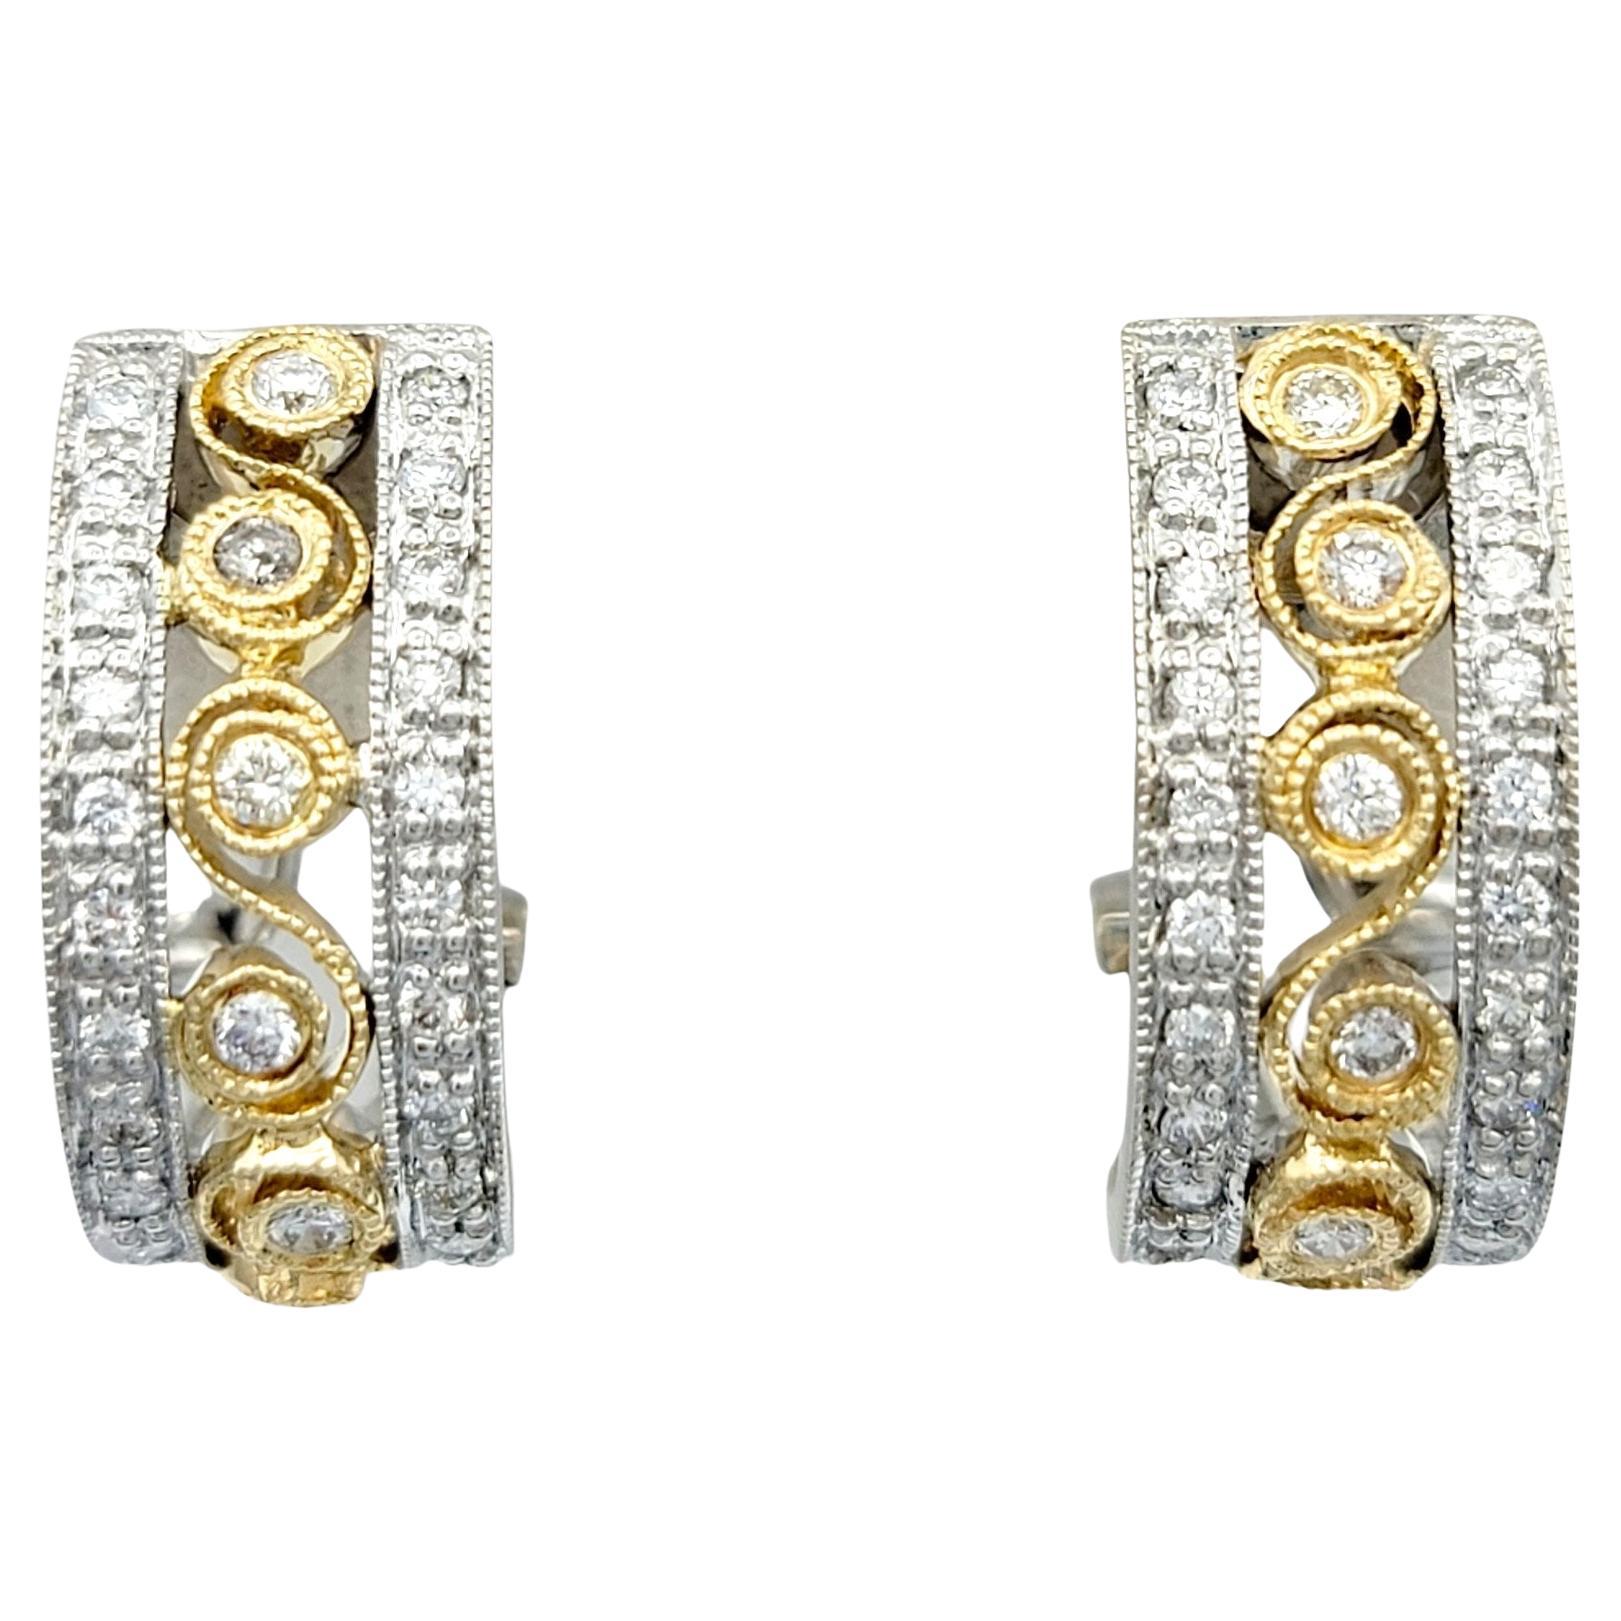 Round Diamond Scroll Design J-Hoop Earrings in 14 Karat White and Yellow Gold For Sale